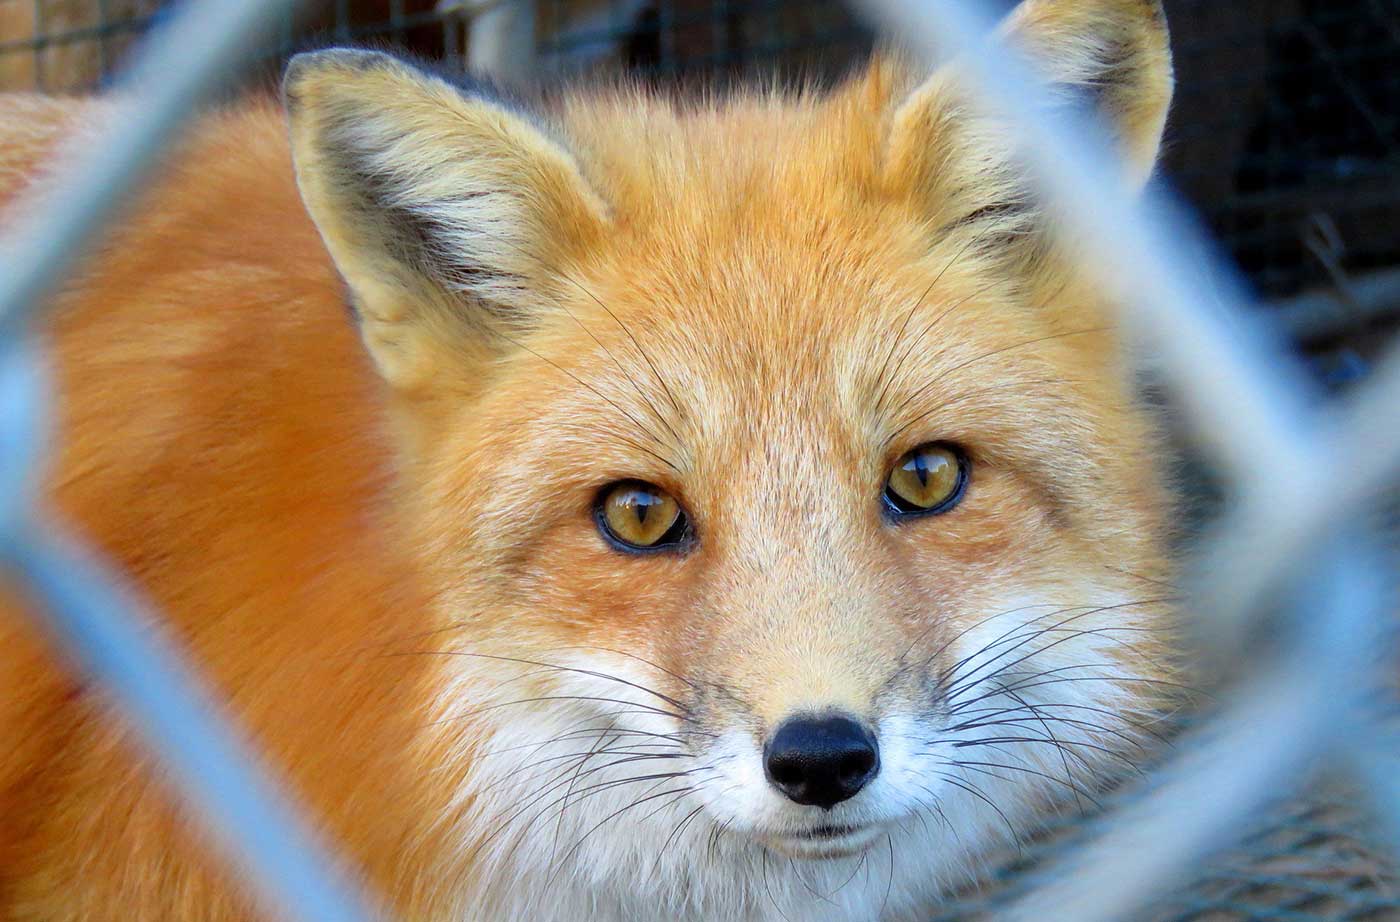 close up of fox's face, taken through chain link cage